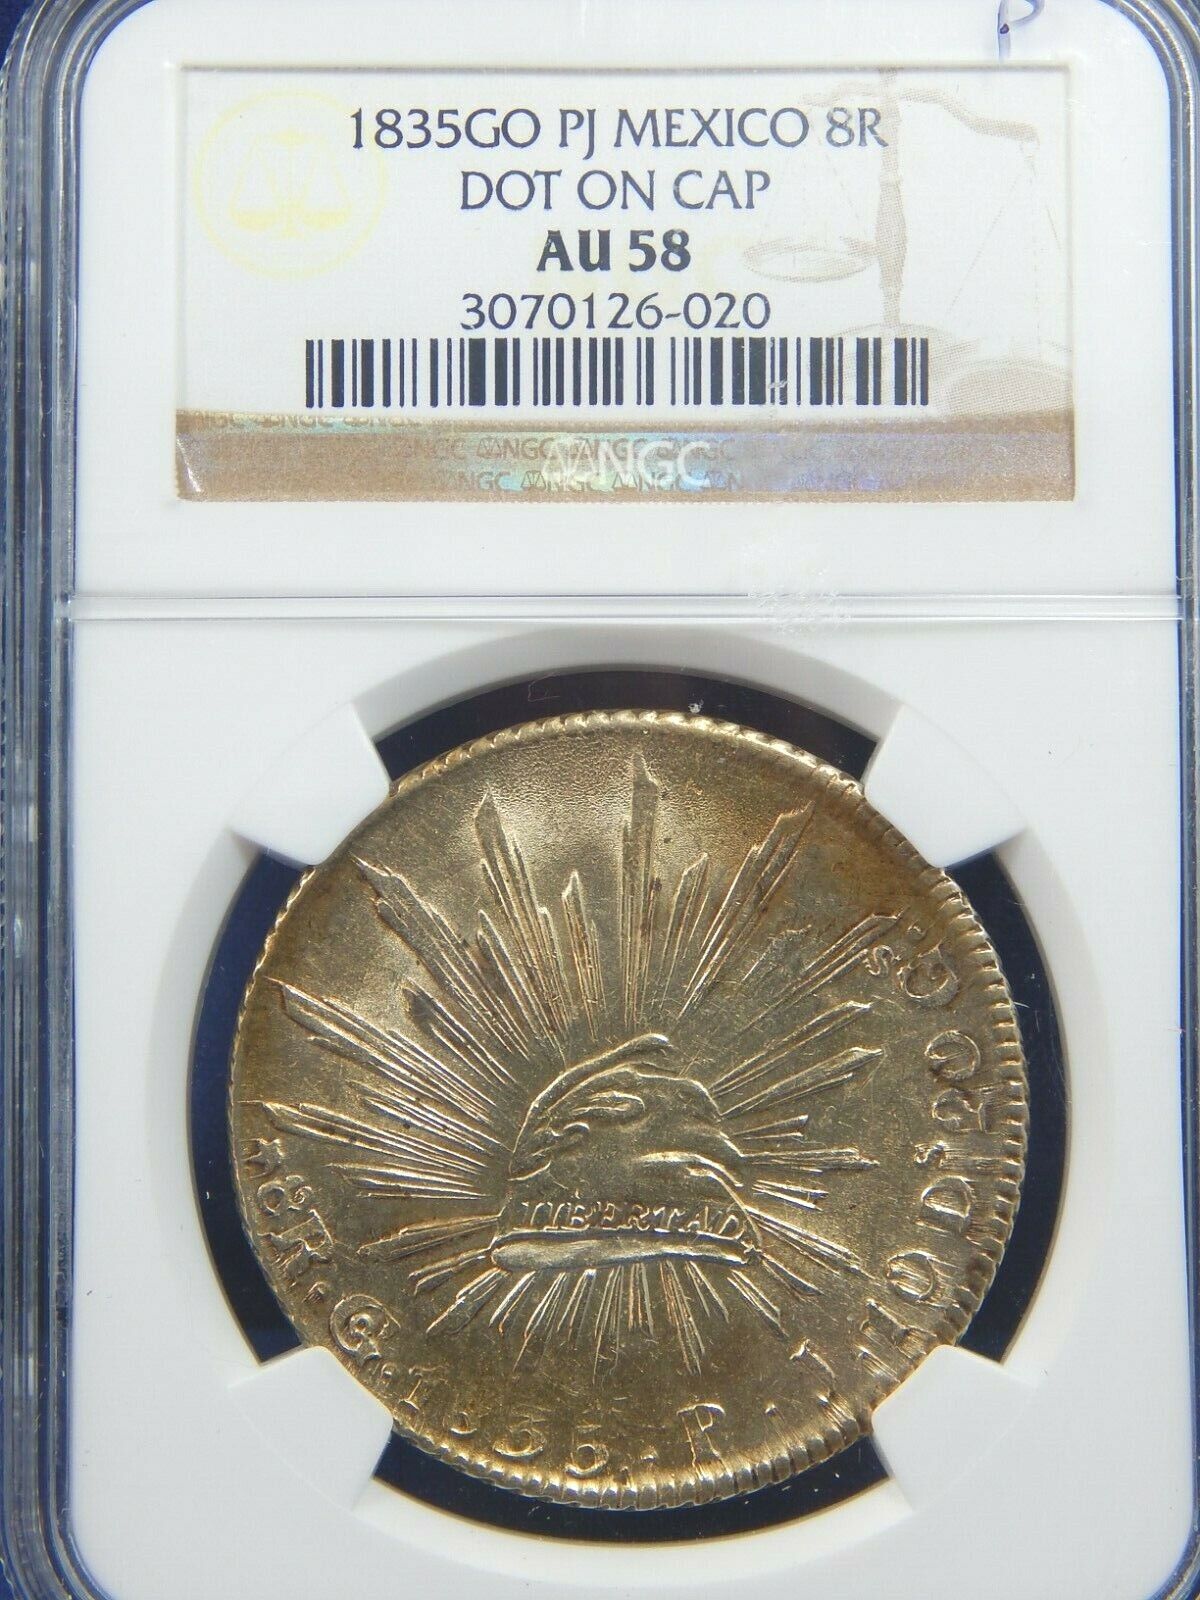 1835 Go Pj 8 Reales Mexico Ngc Au58 Cap & Rays Rare Silver Crown Star On Cap